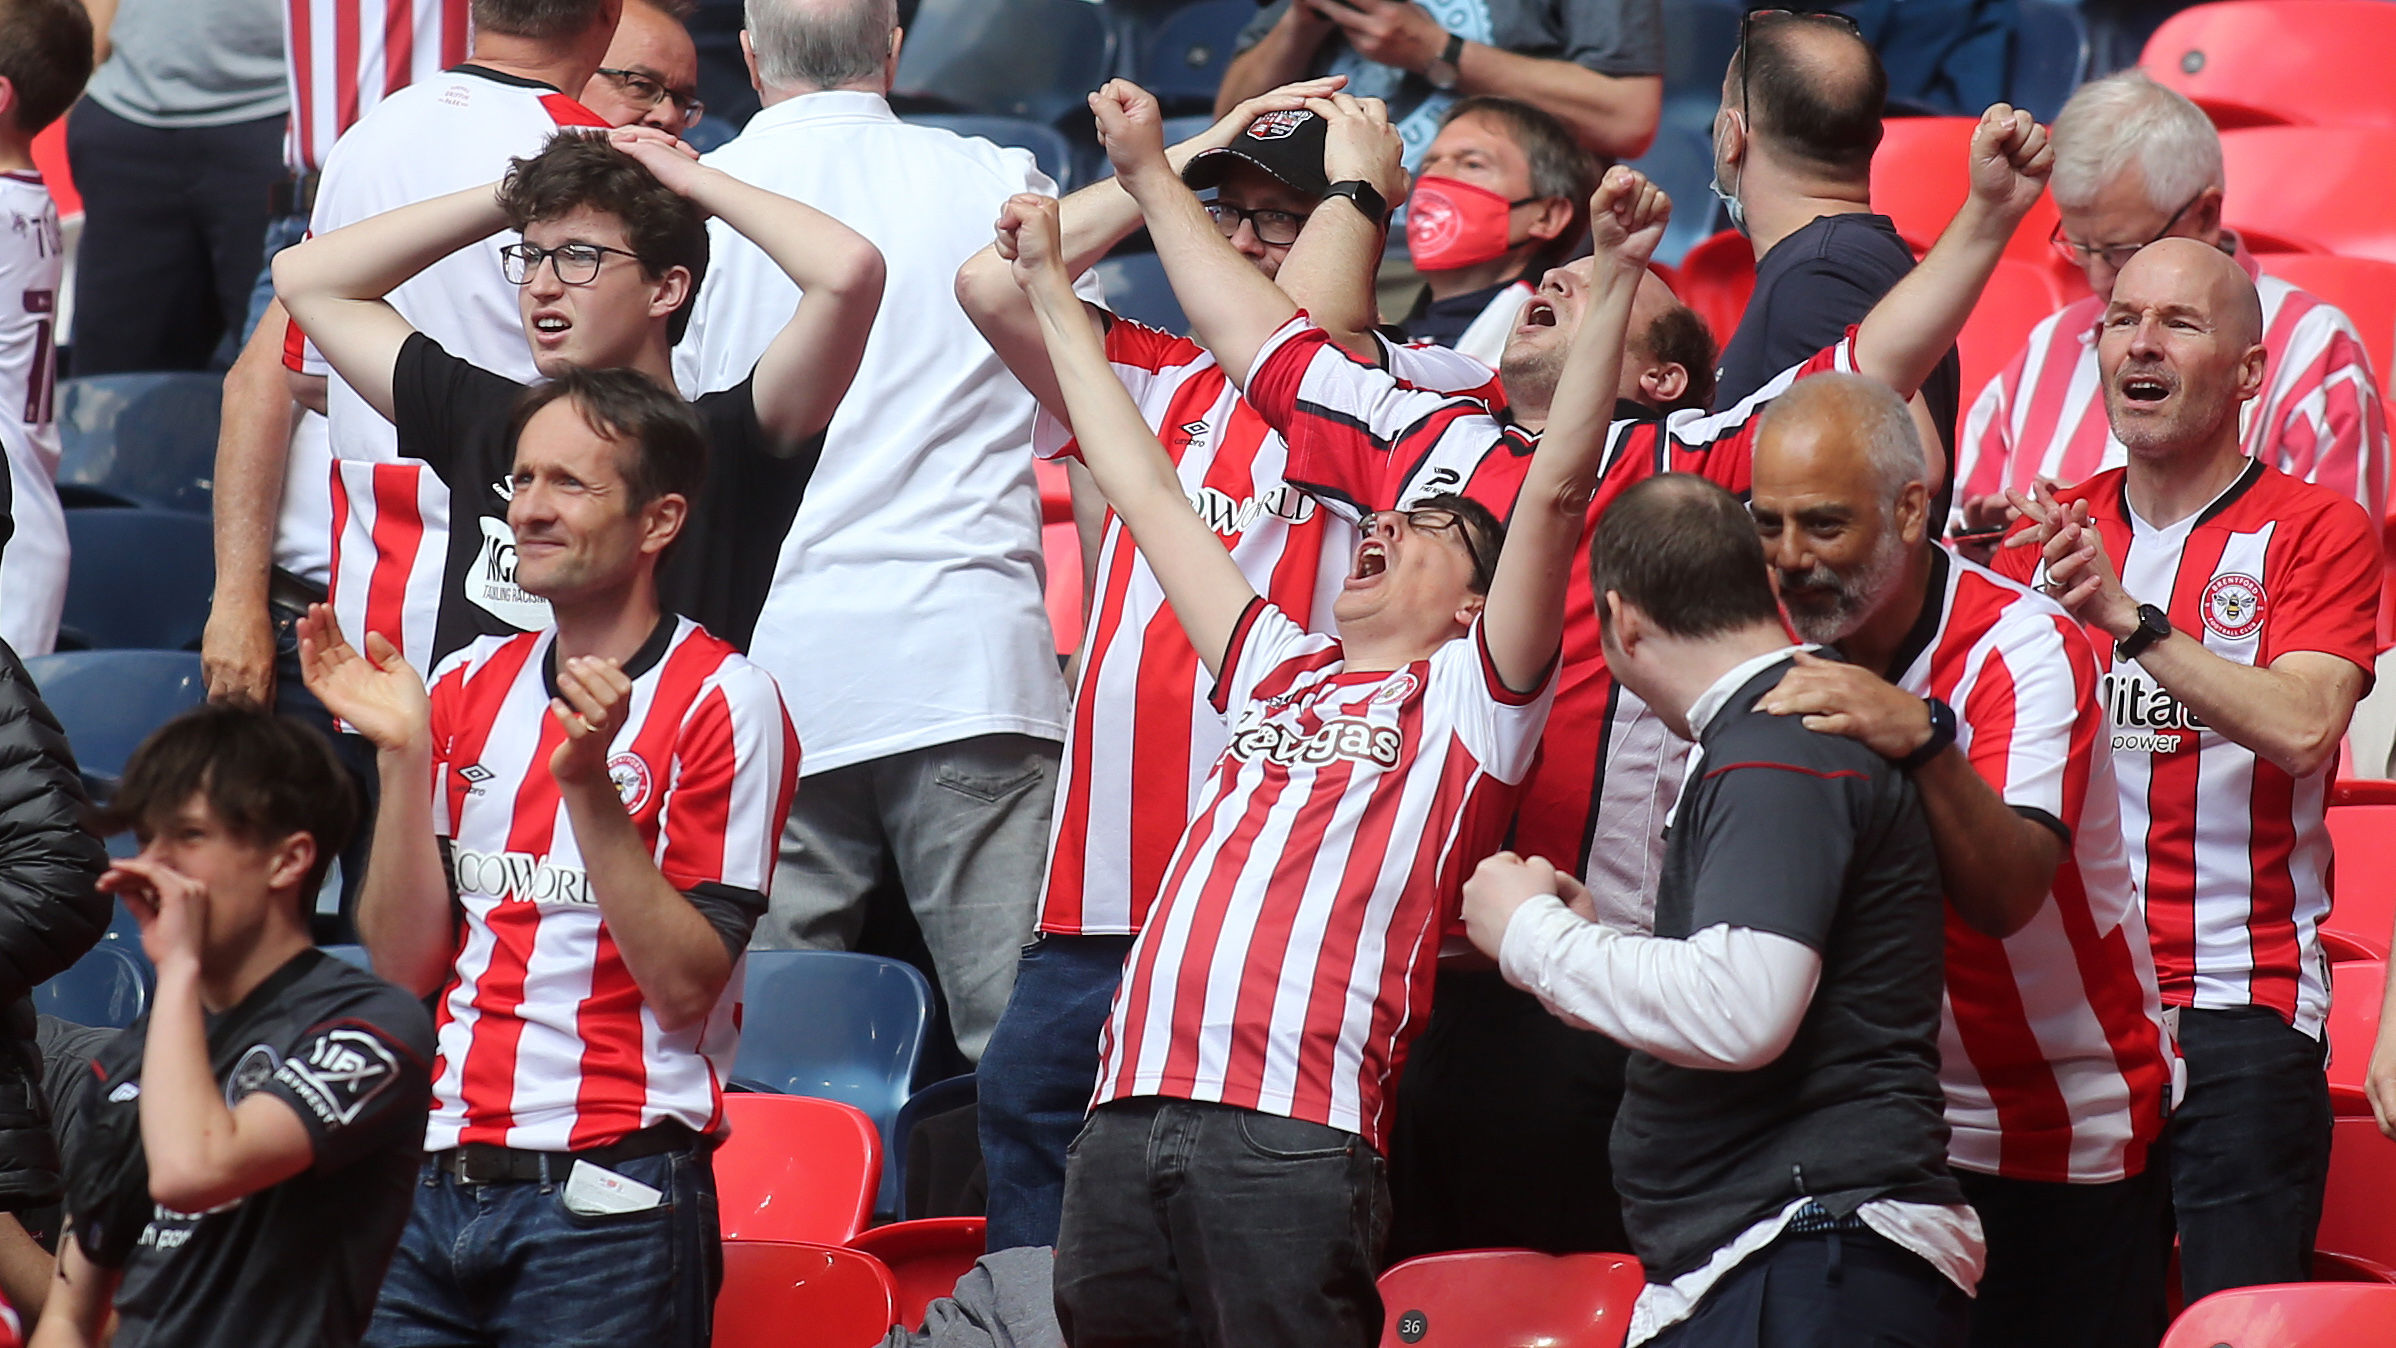 The Bees are buzzing. Fans elated as Brentford are back in Premier League